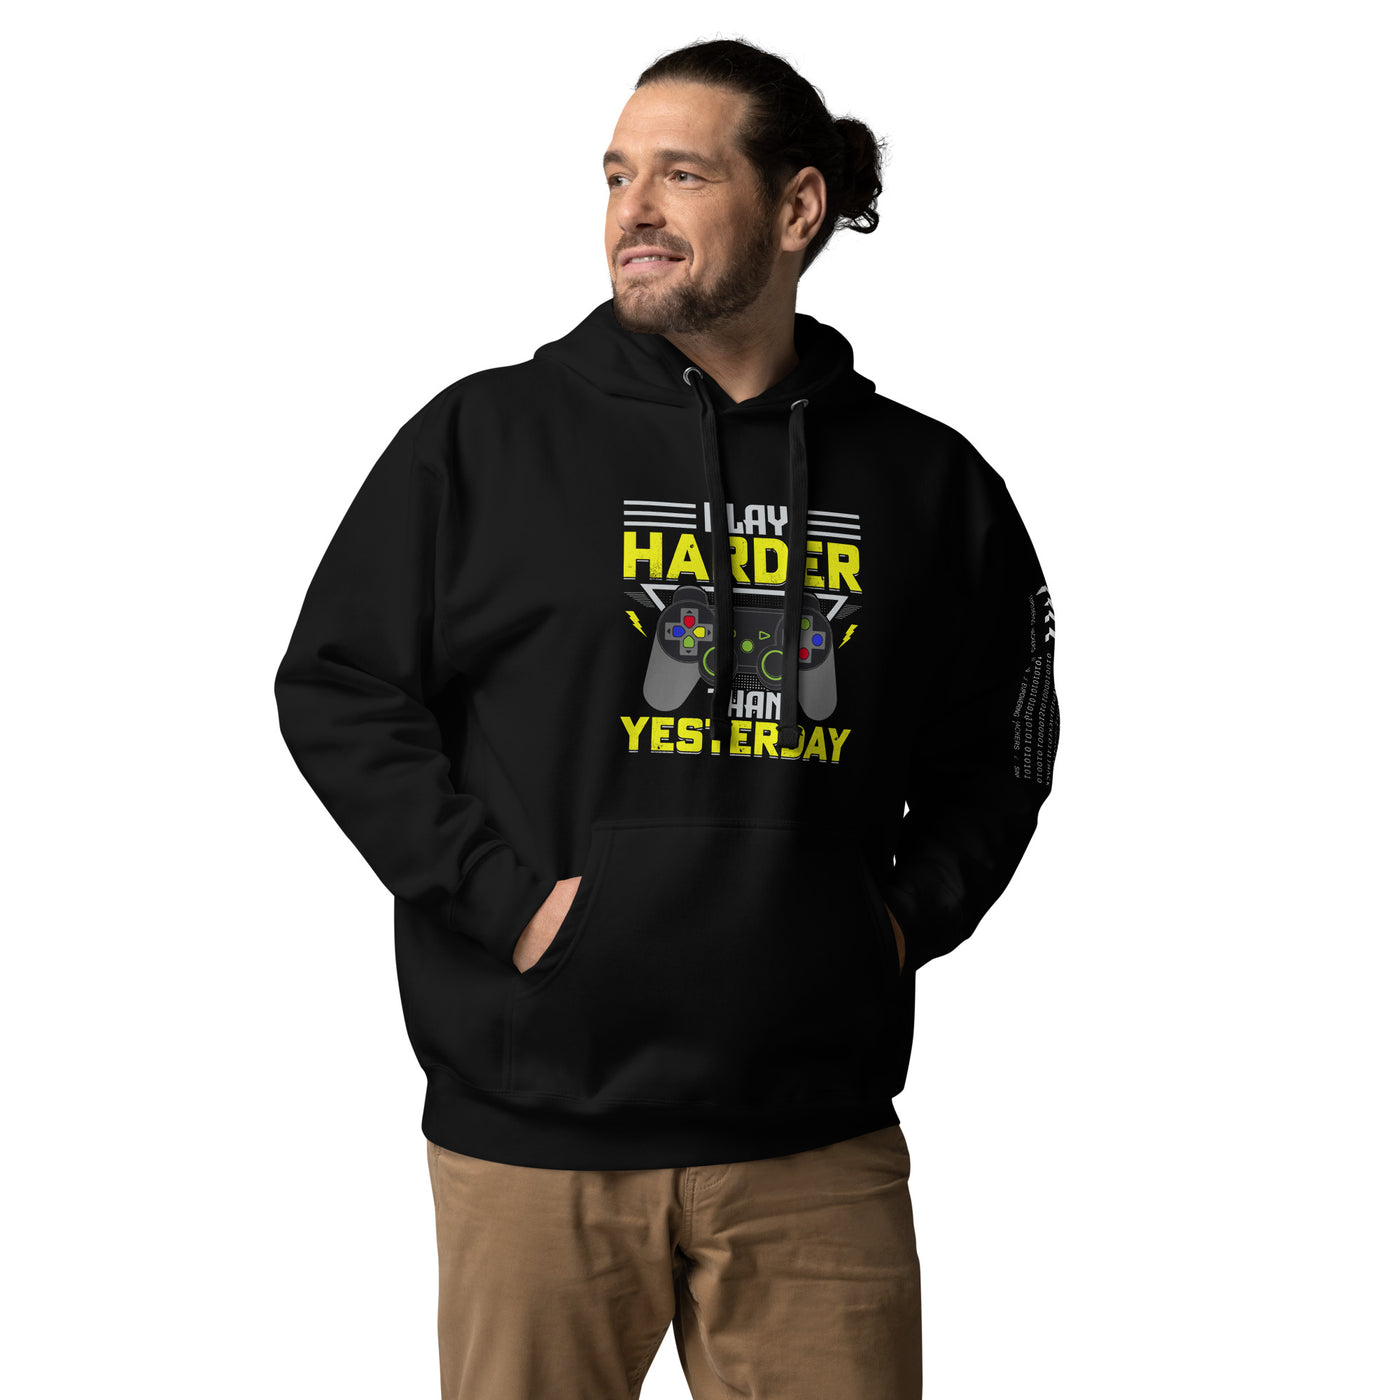 Play harder than Yesterday - Unisex Hoodie